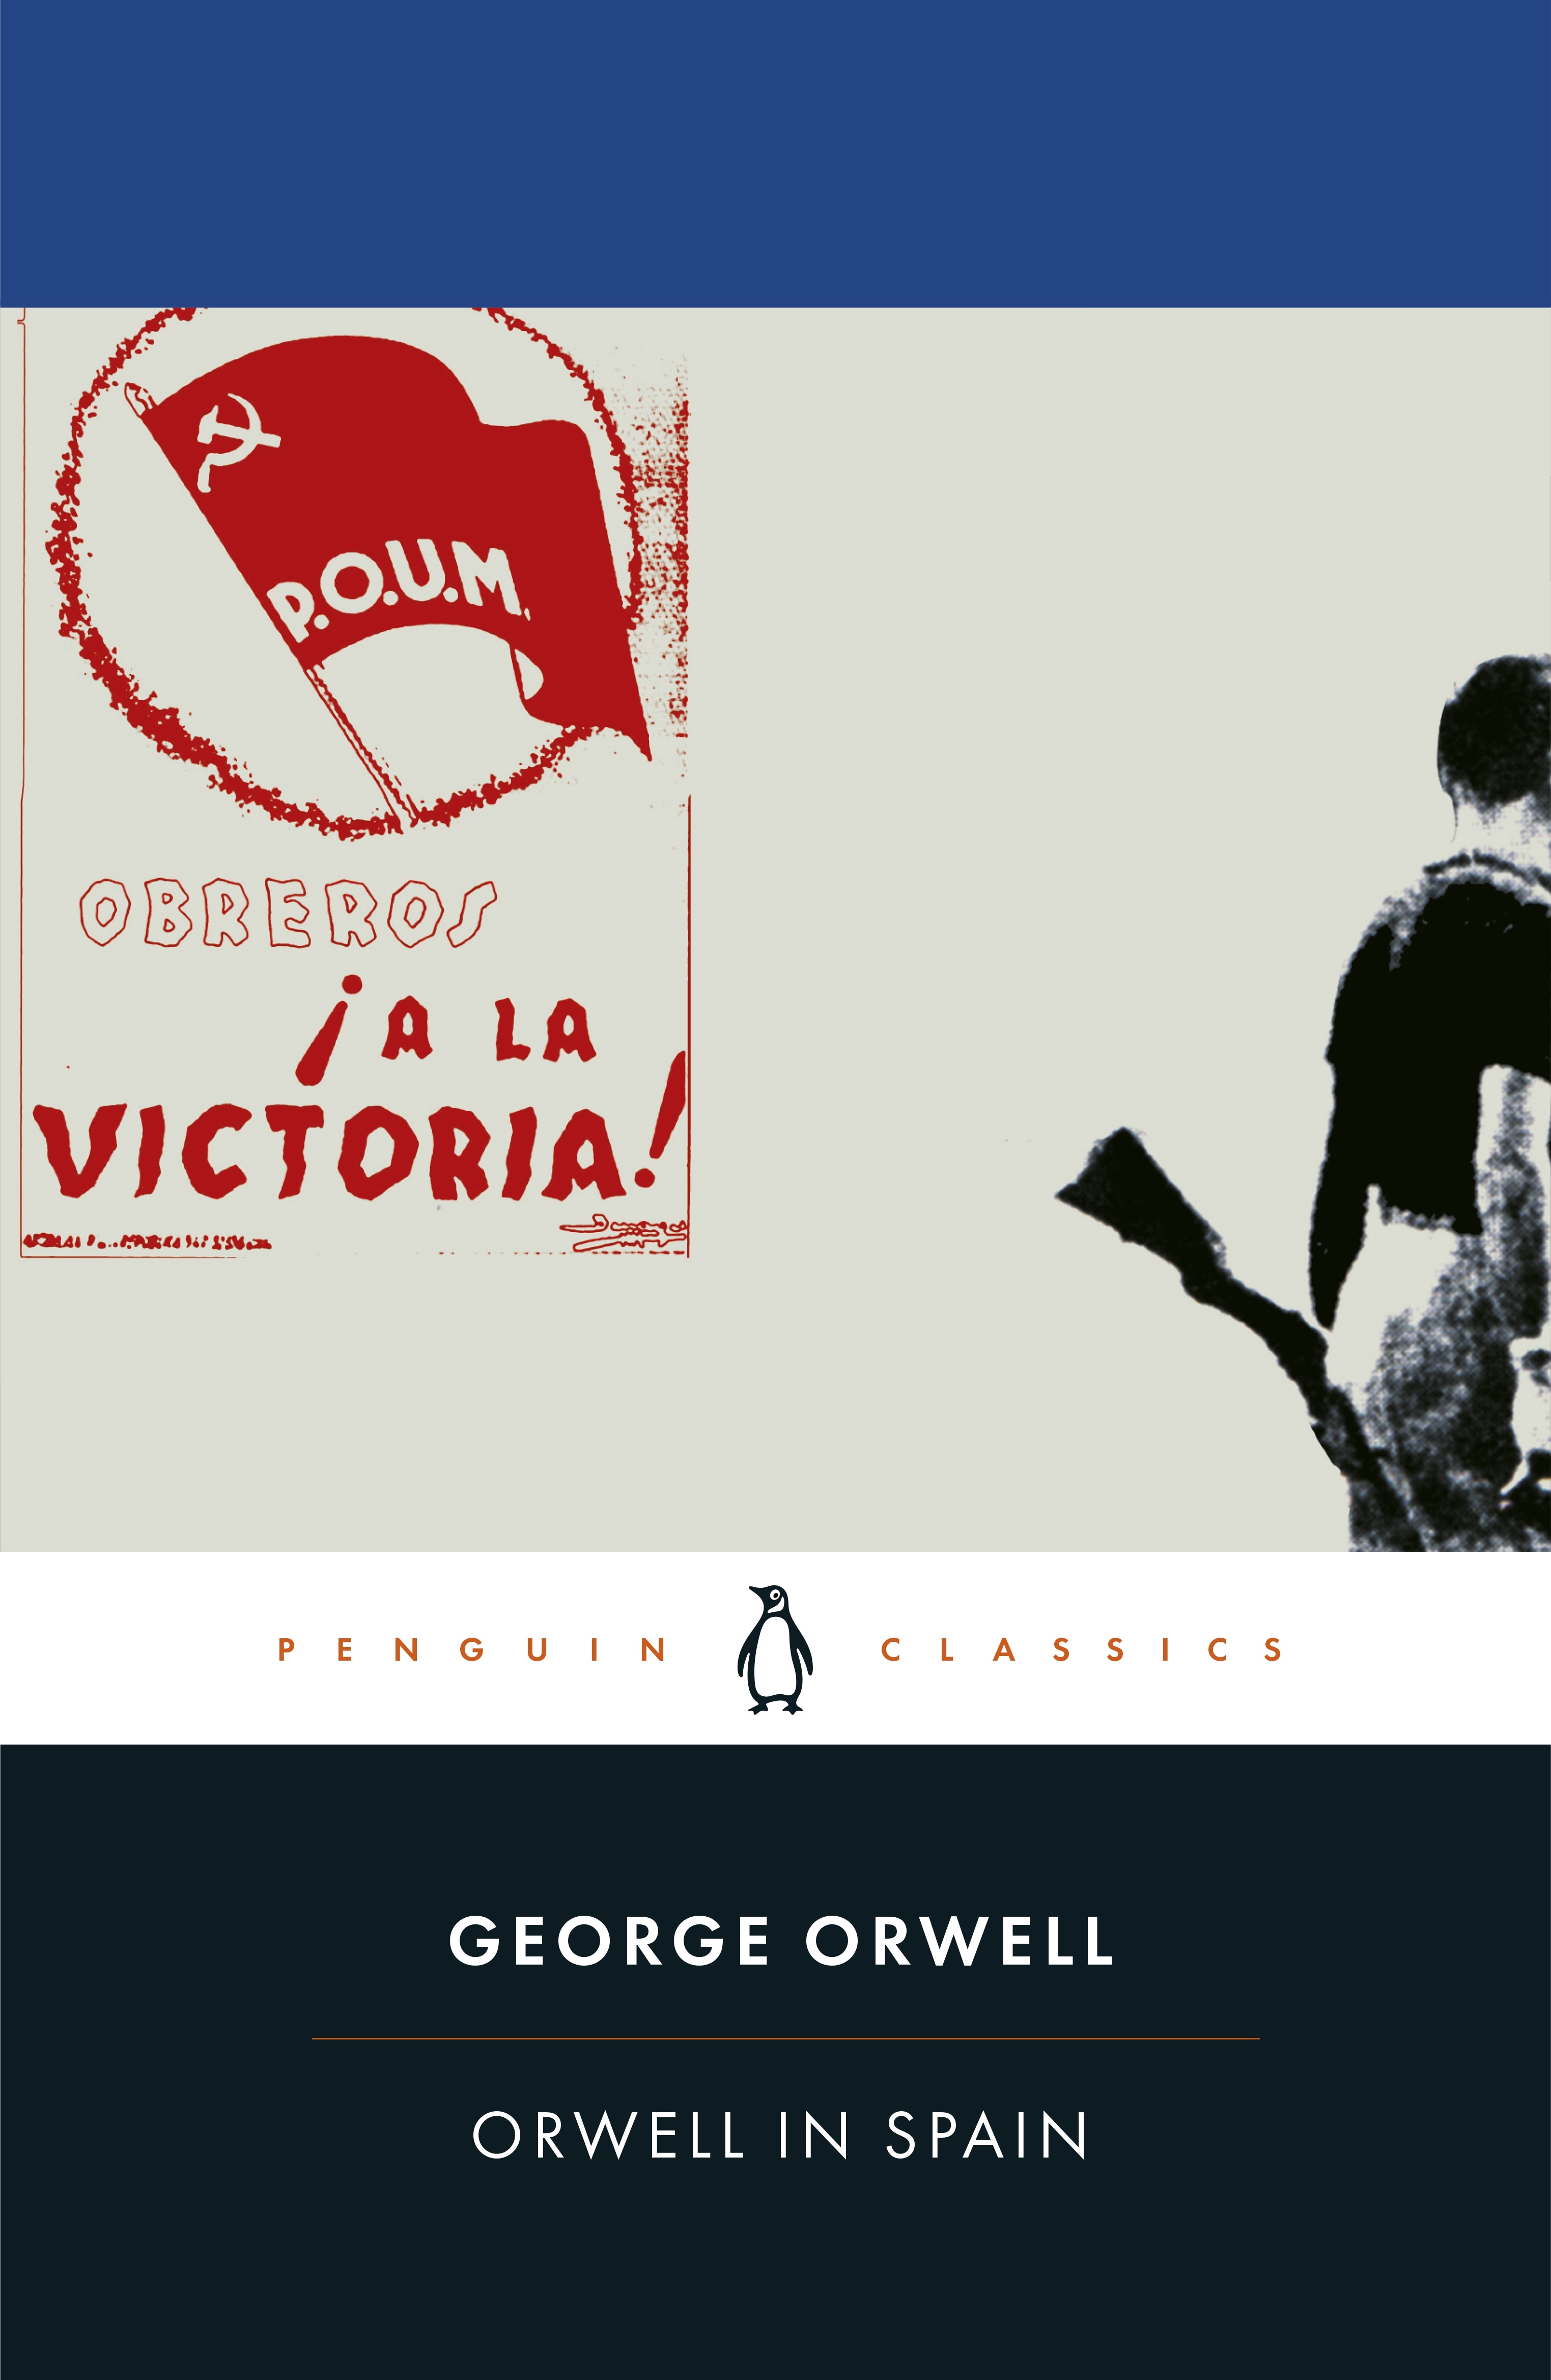 Book “Orwell in Spain” by George Orwell — October 1, 2020